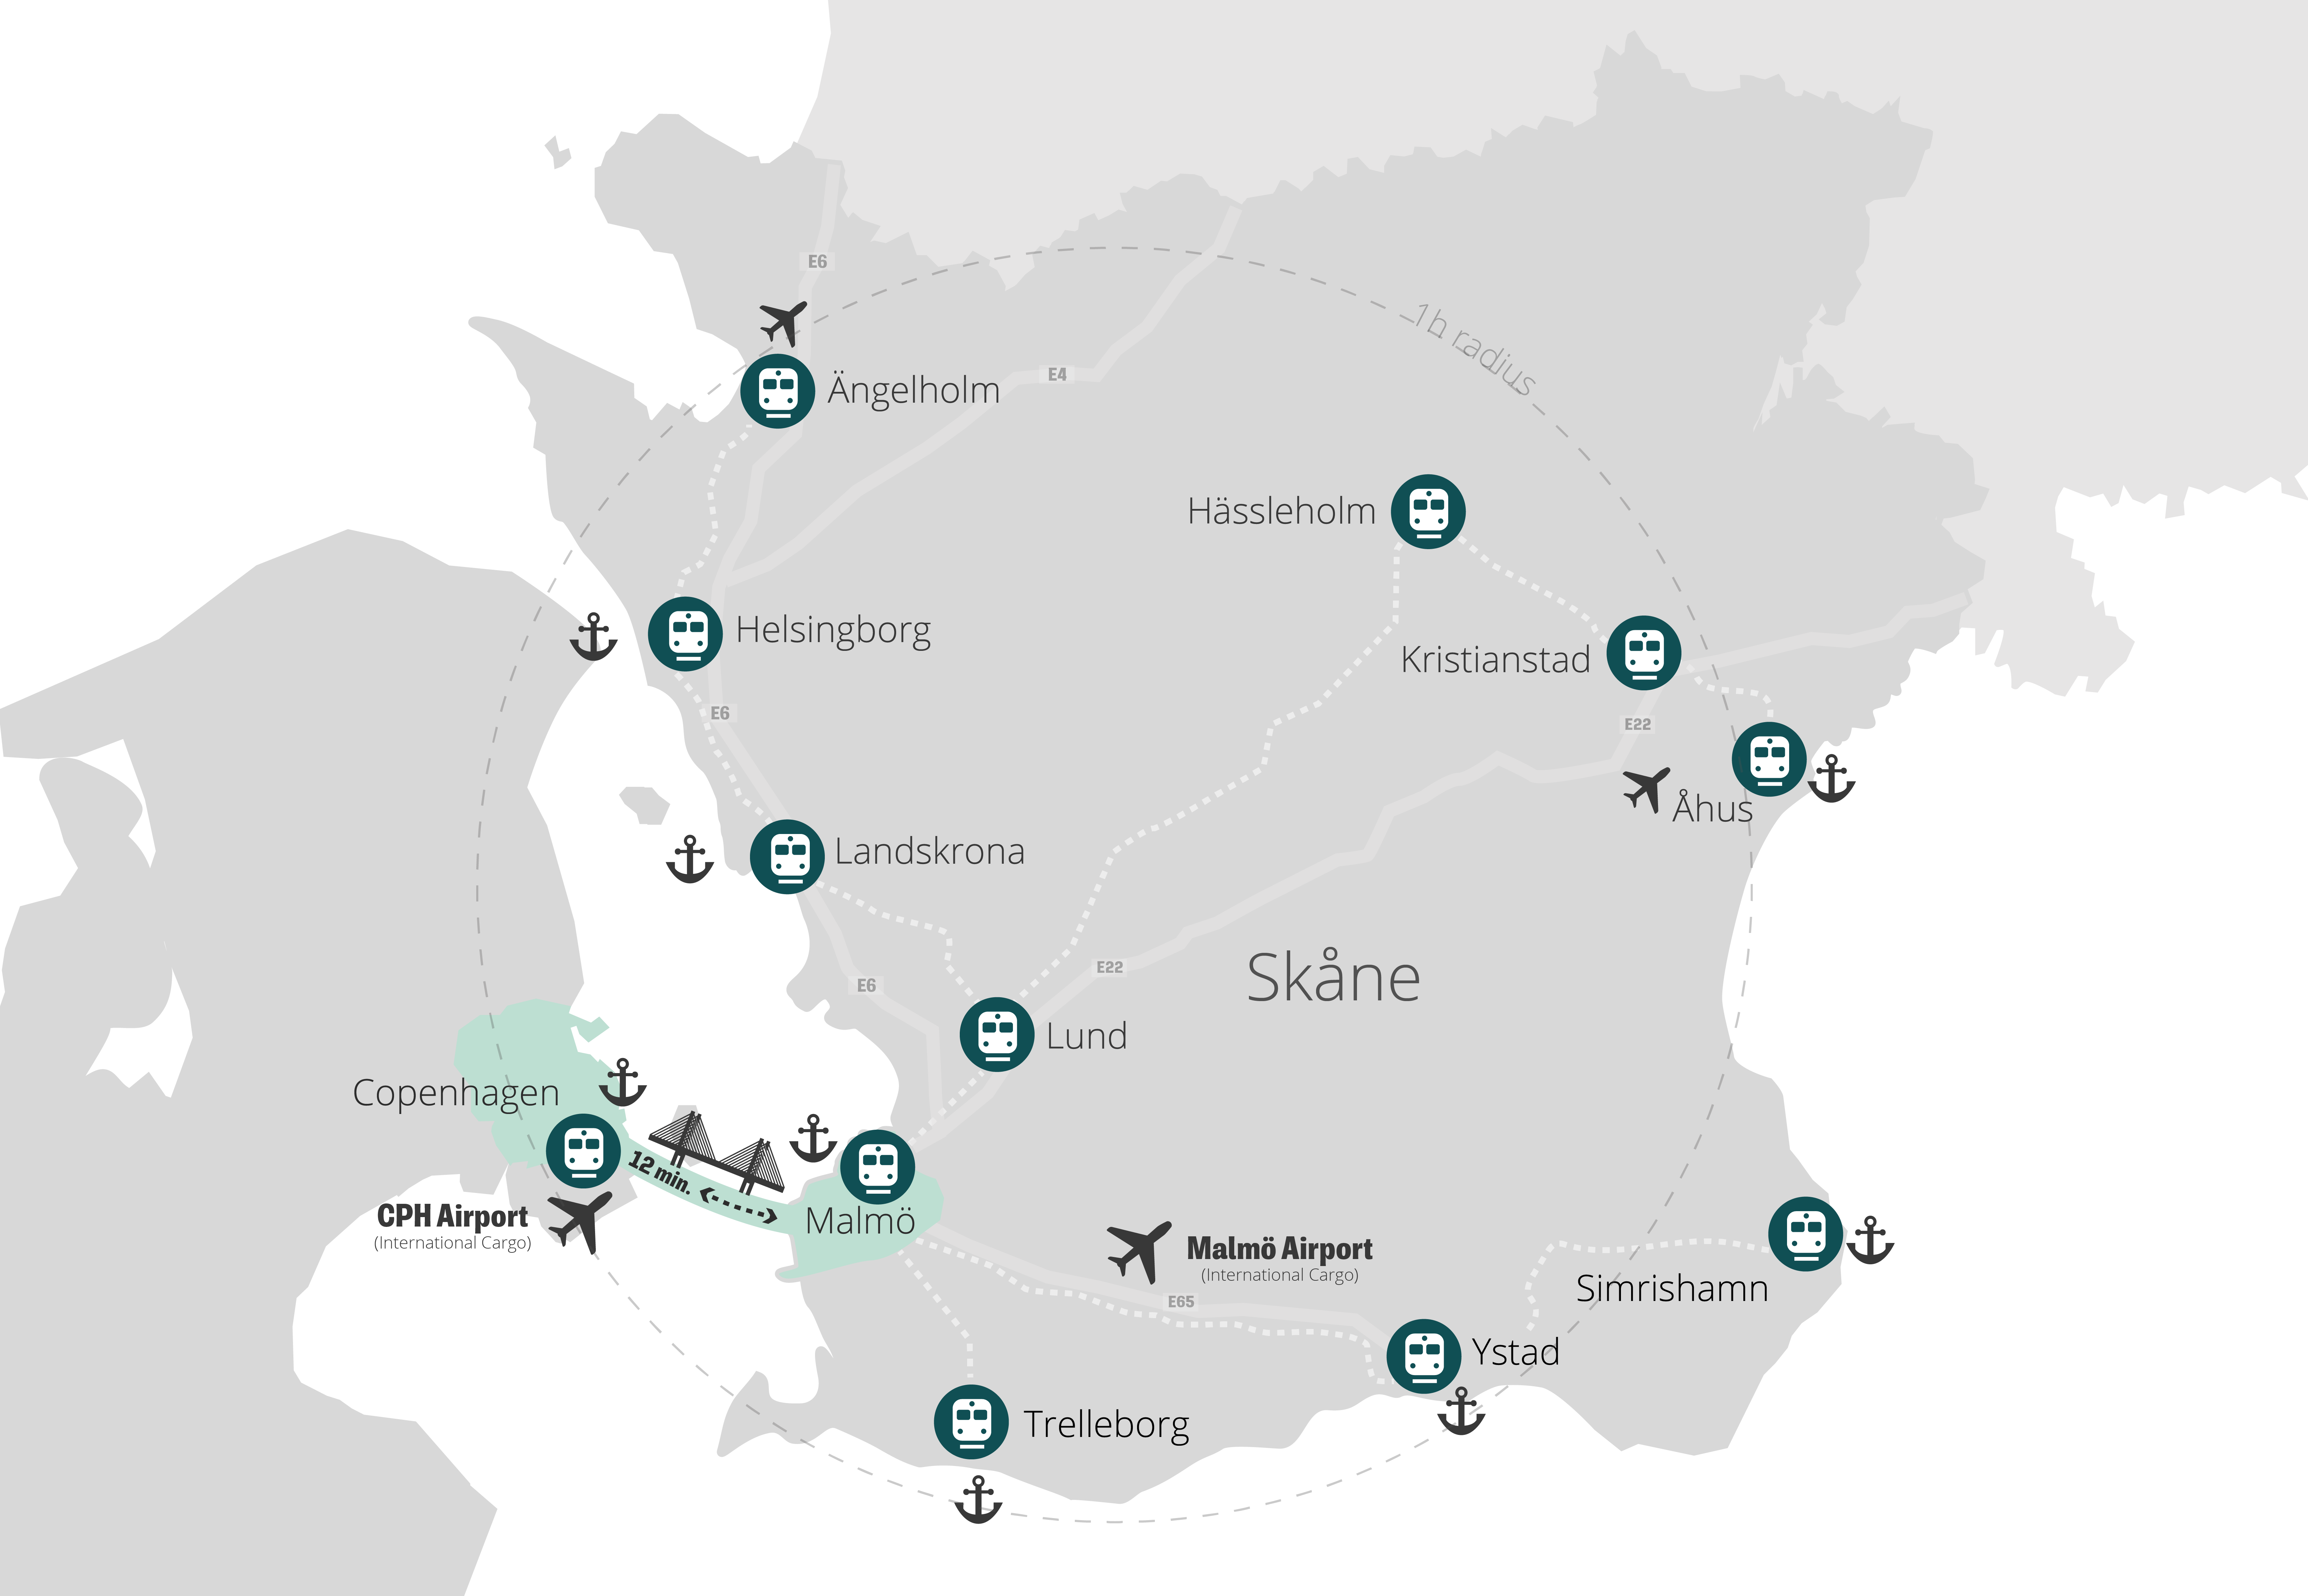 Graphical map of the transport infrastructure in the Skåne region